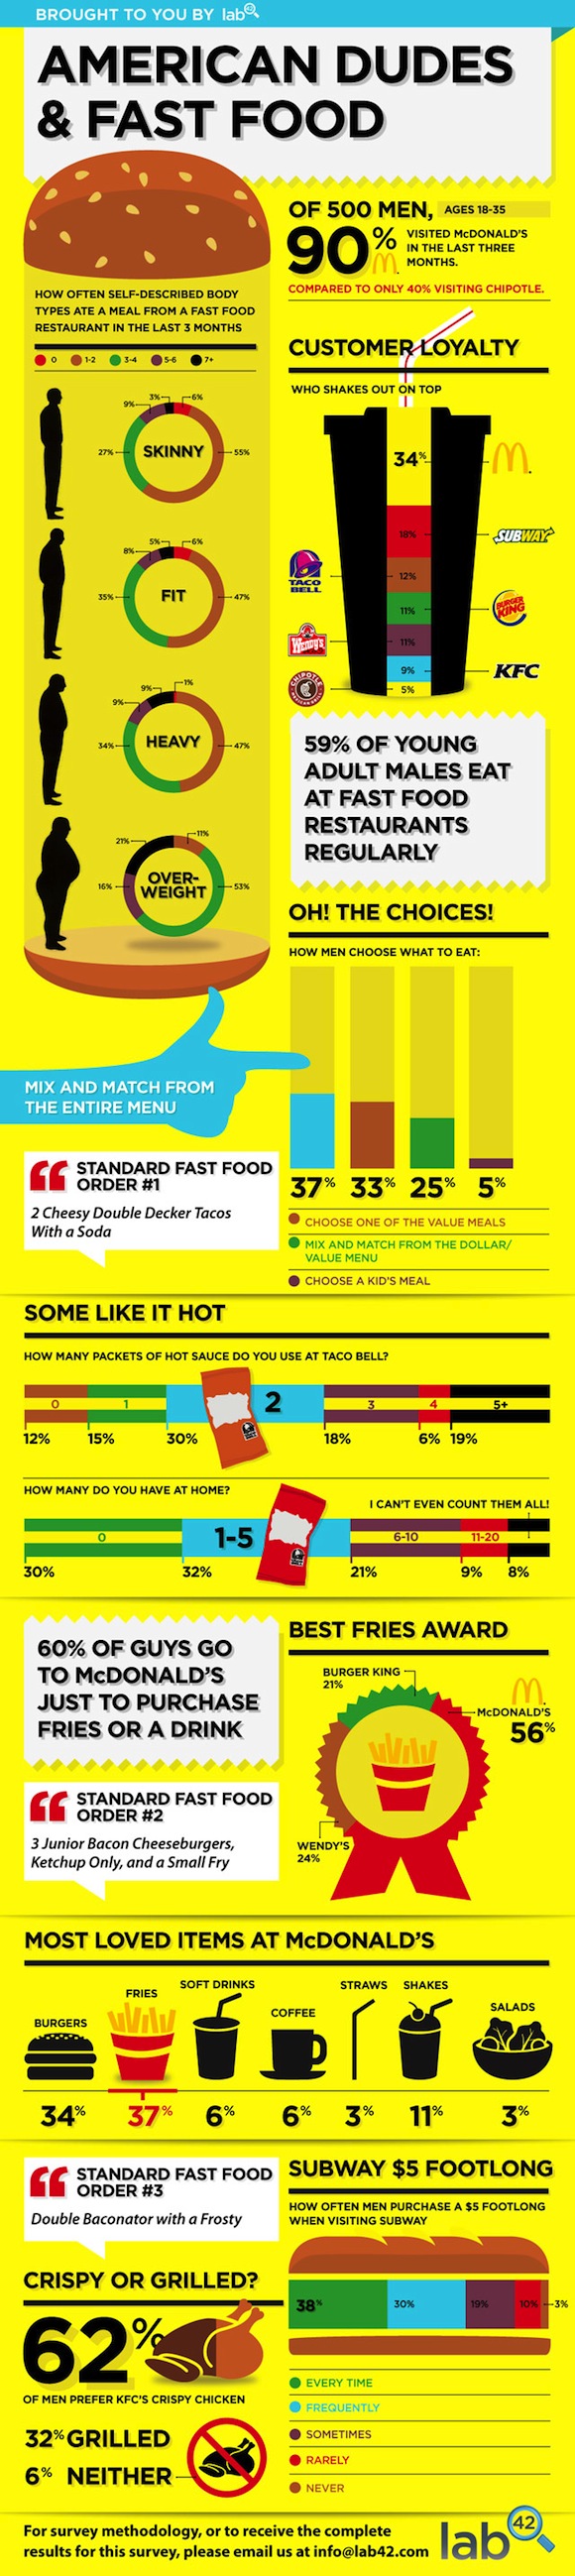 Fast Food Statistics and Trends